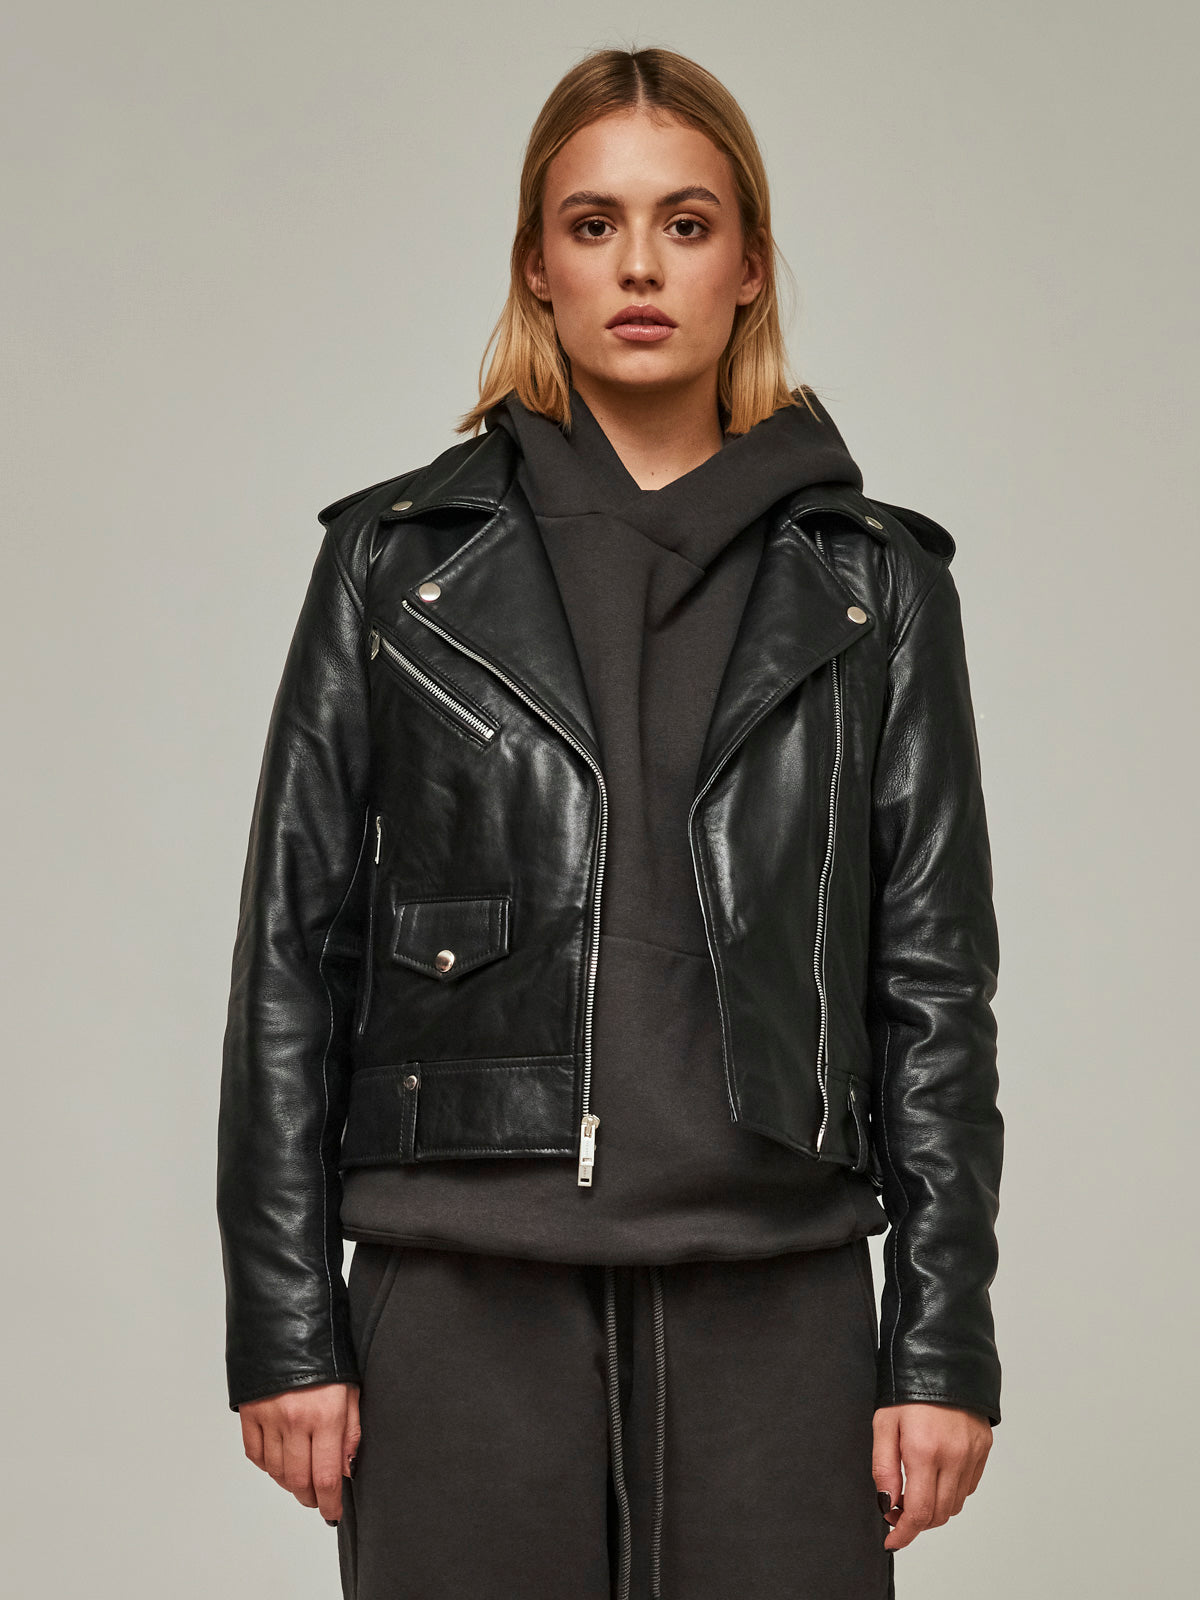 Carbon Gloss Leather Jacket Women/ LMTD Edition